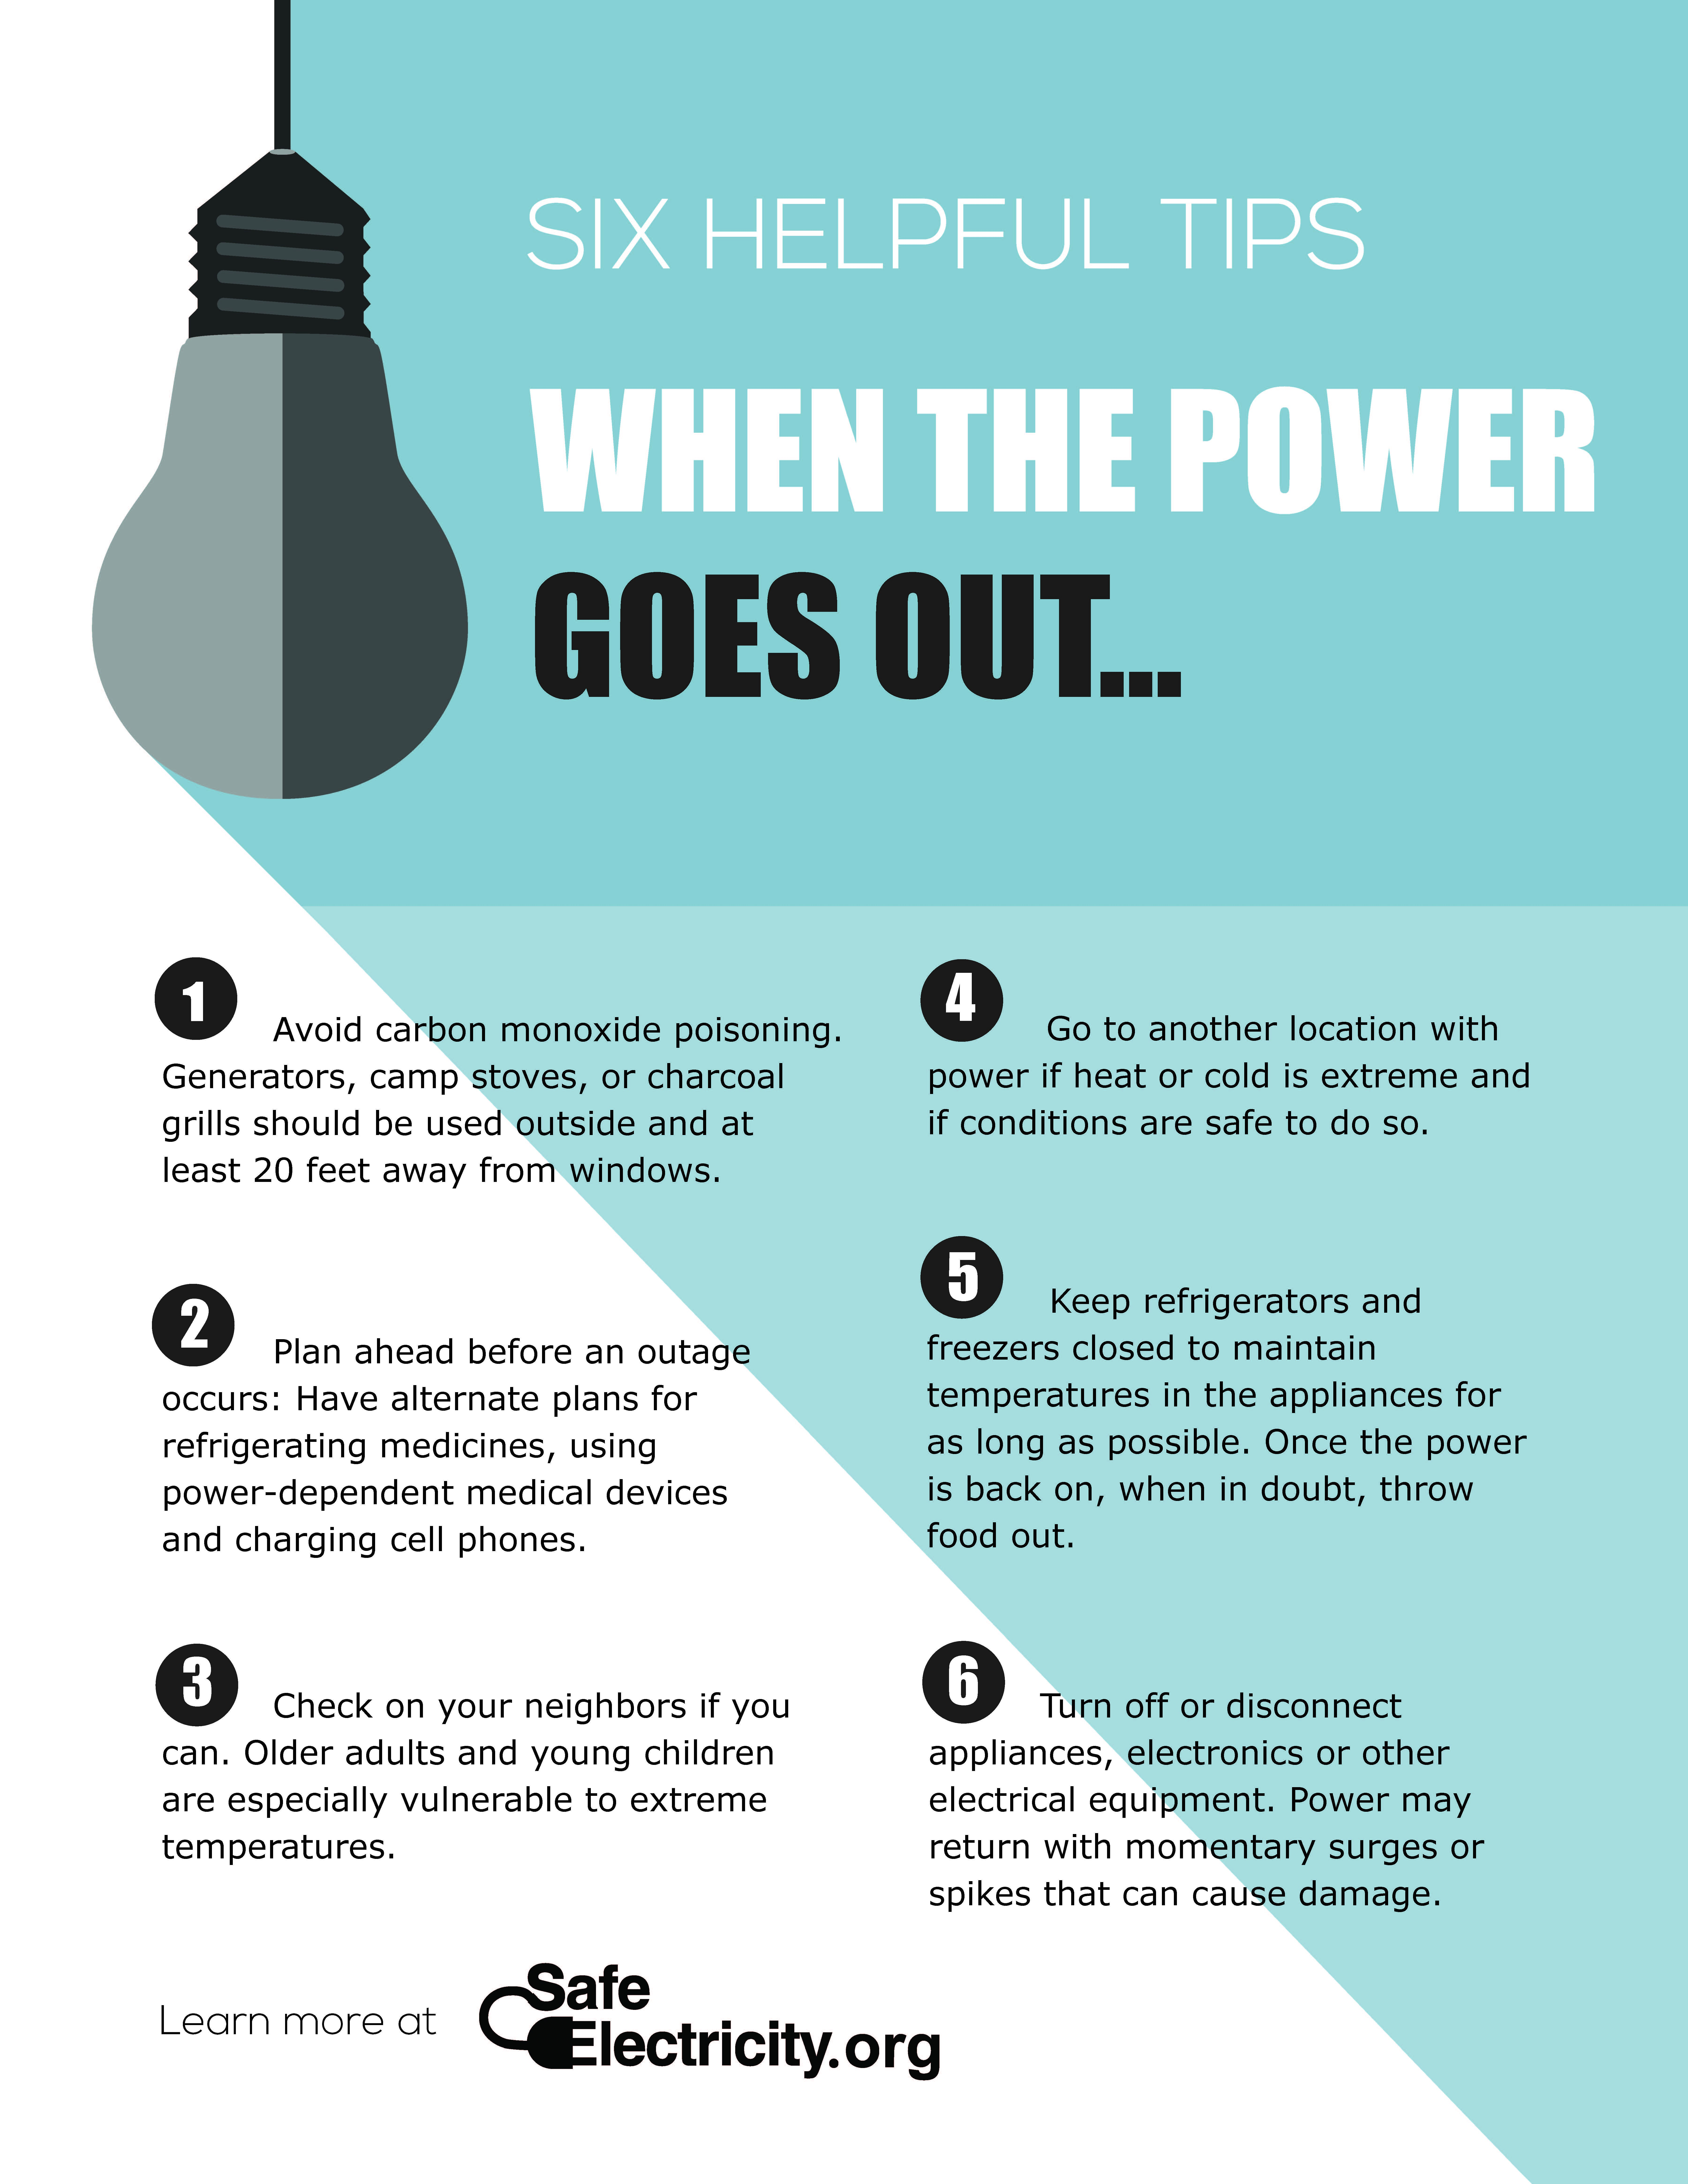 5 Essential Tips to Prepare for a Power Outage